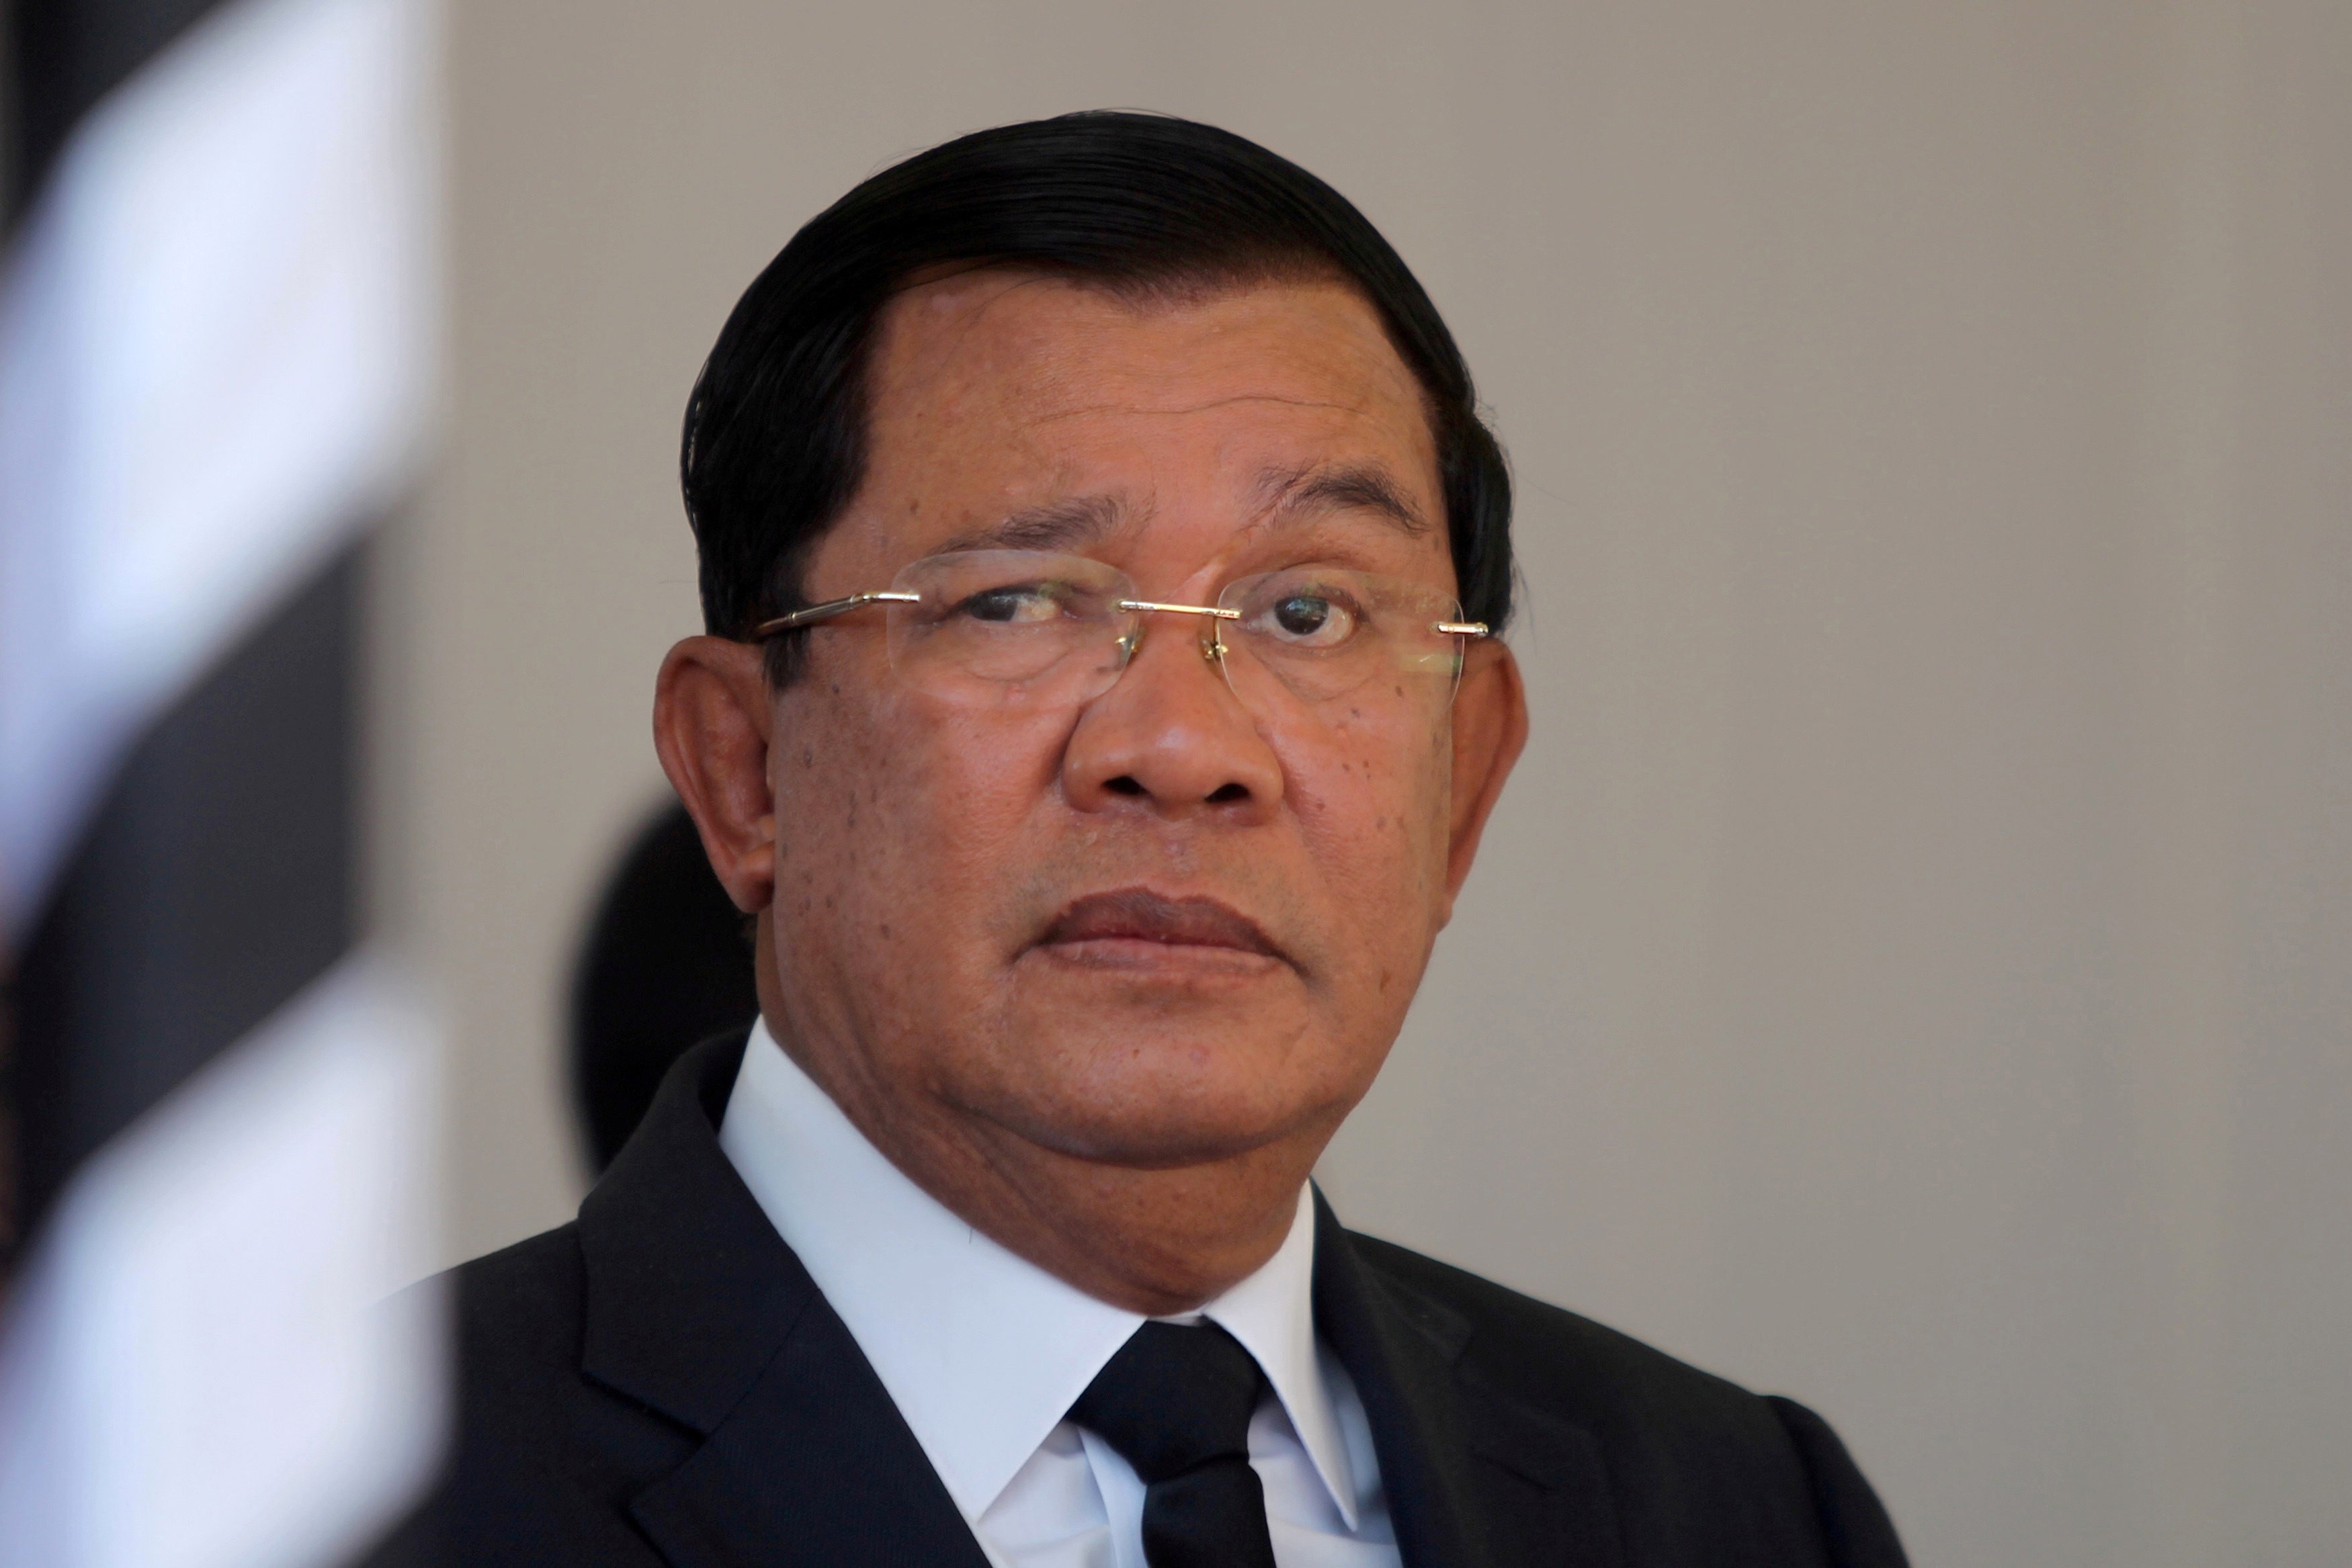 In recent weeks, Cambodian Prime Minister Hun Sen has accused the US of promoting insurrection and trying to topple the government. Photo: Reuters